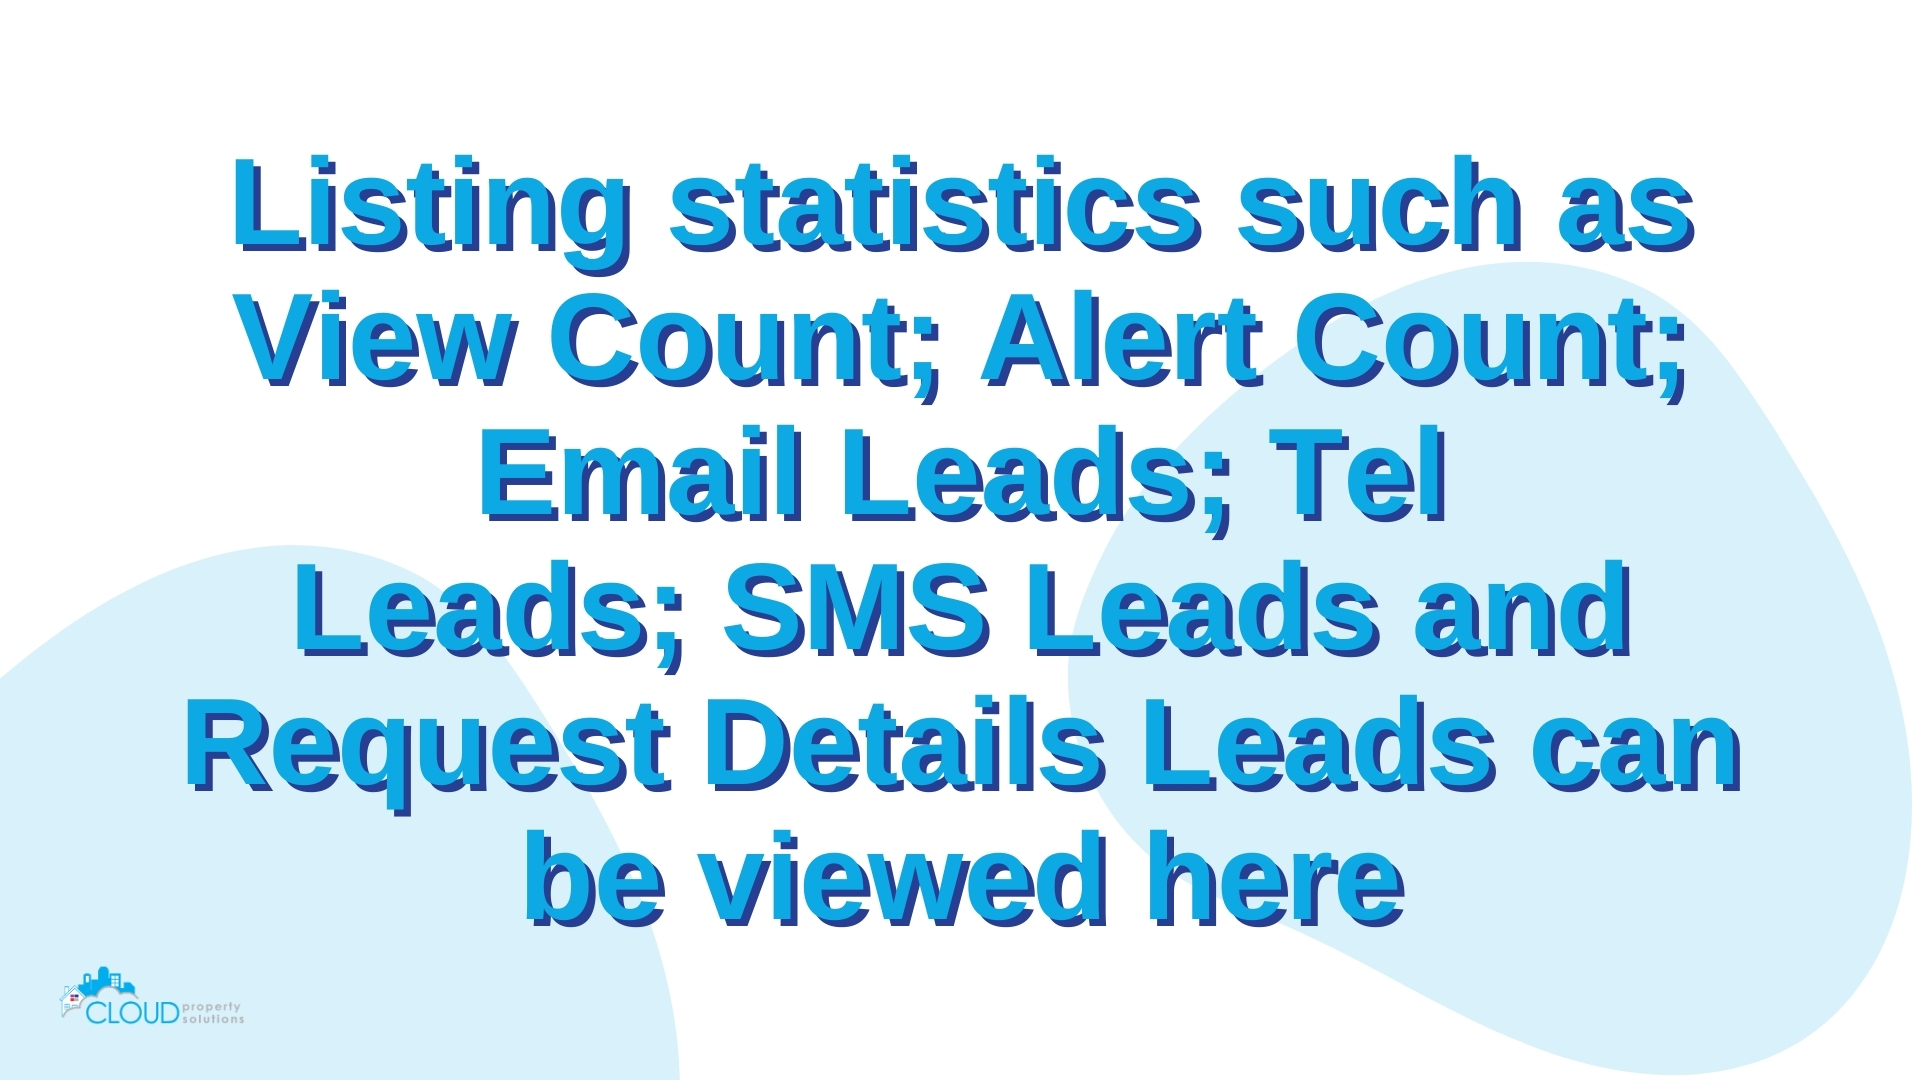 View count, Alert count, Email Leads and SMS Leads.